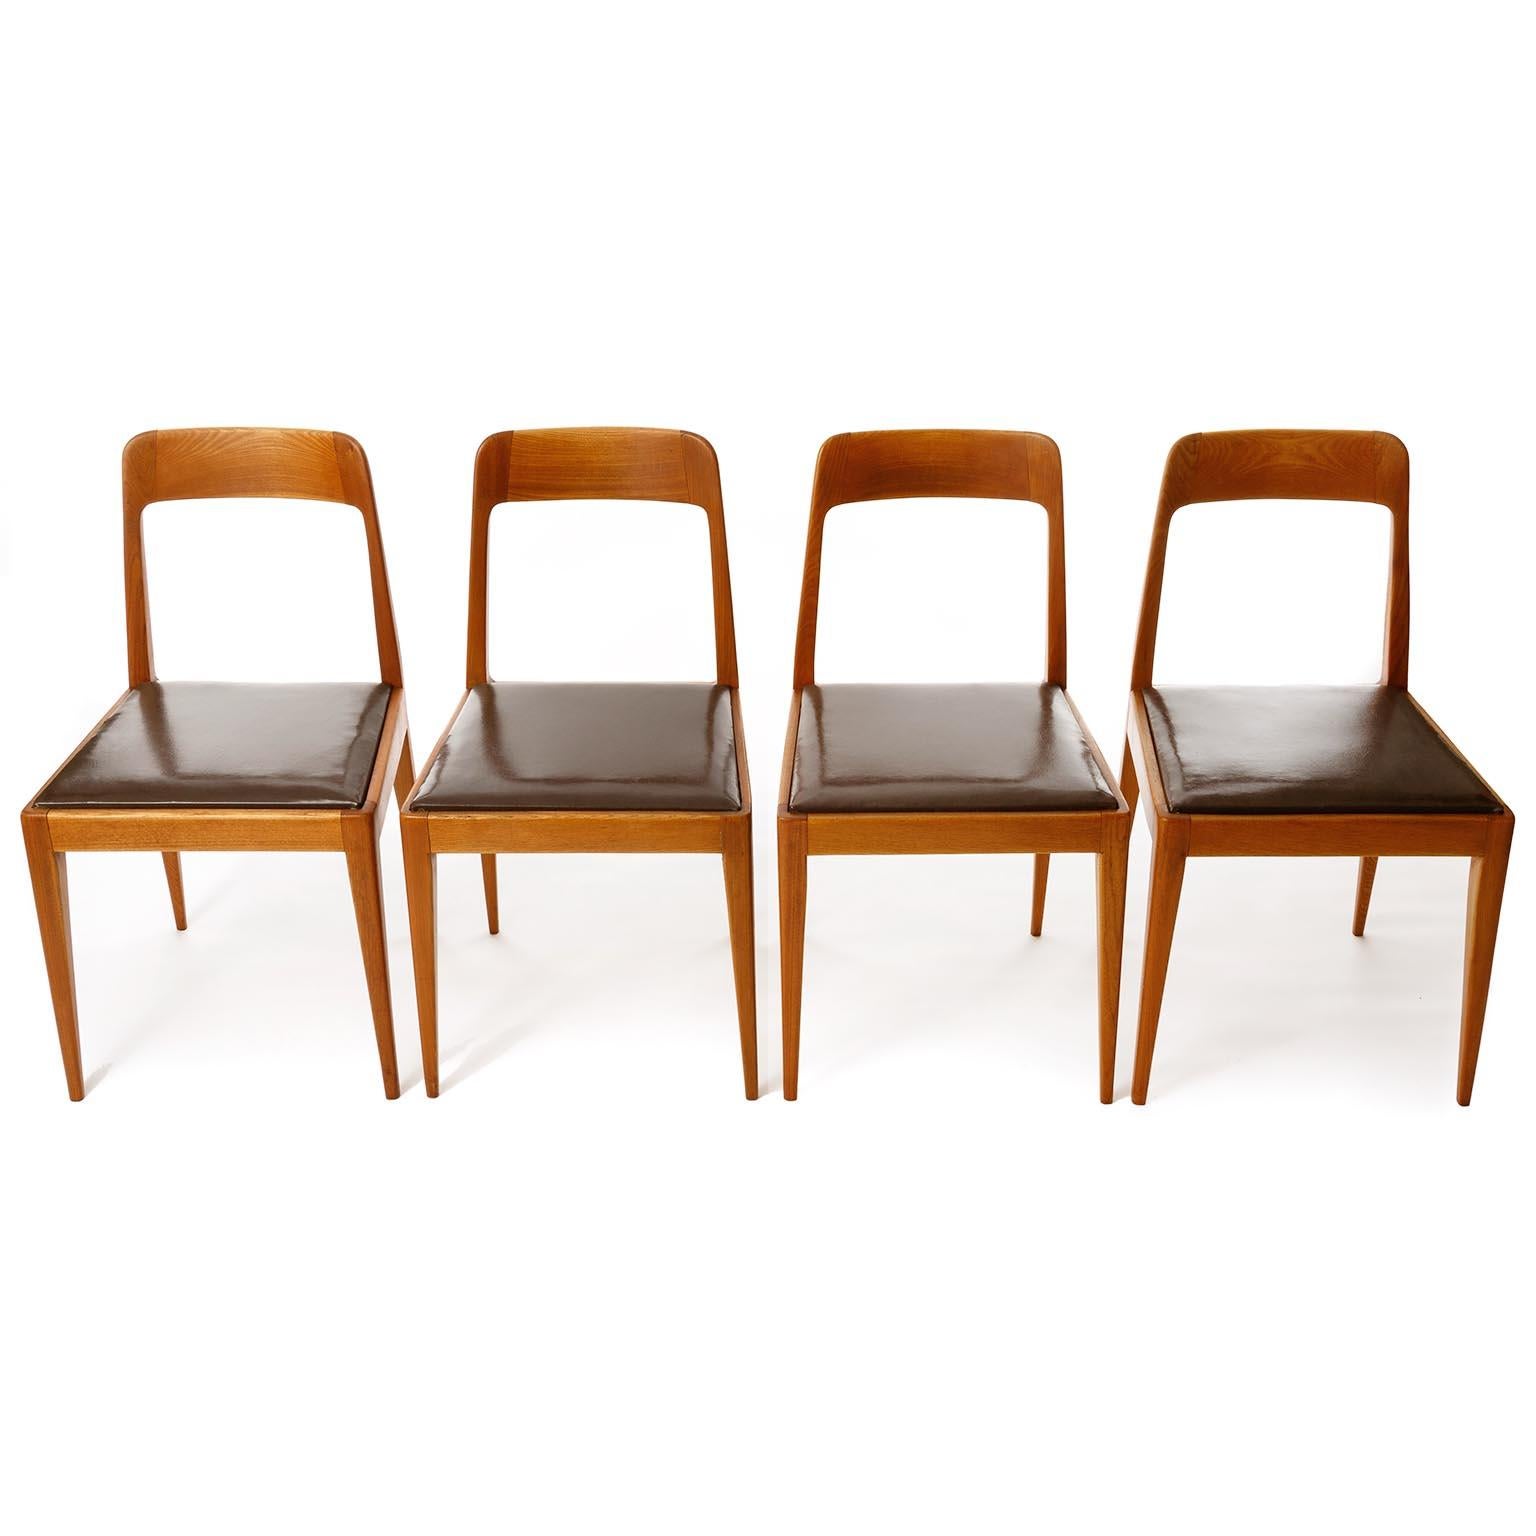 A rare set of four dining room or side chairs model 'A7' by Carl Auböck, Vienna, Austria, manufactured in midcentury, circa 1950.
The chairs are made of warm toned and oiled wood. The wood type is probably elm, oak or esh (they are all very